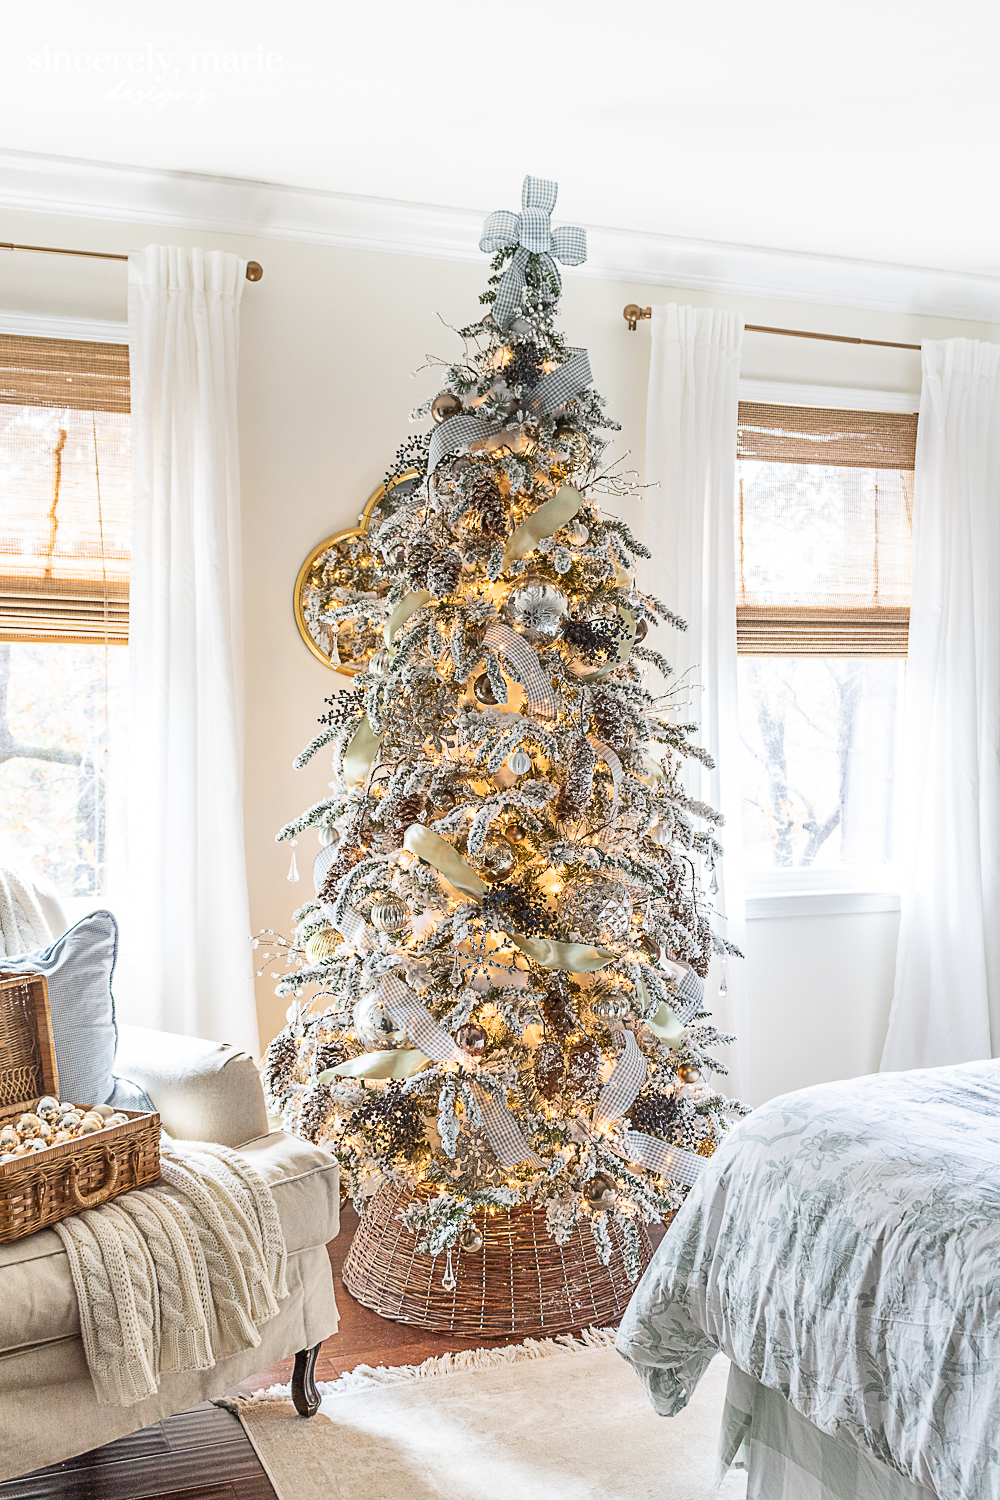 Our Snowy Bedroom Christmas Tree - Sincerely, Marie Designs